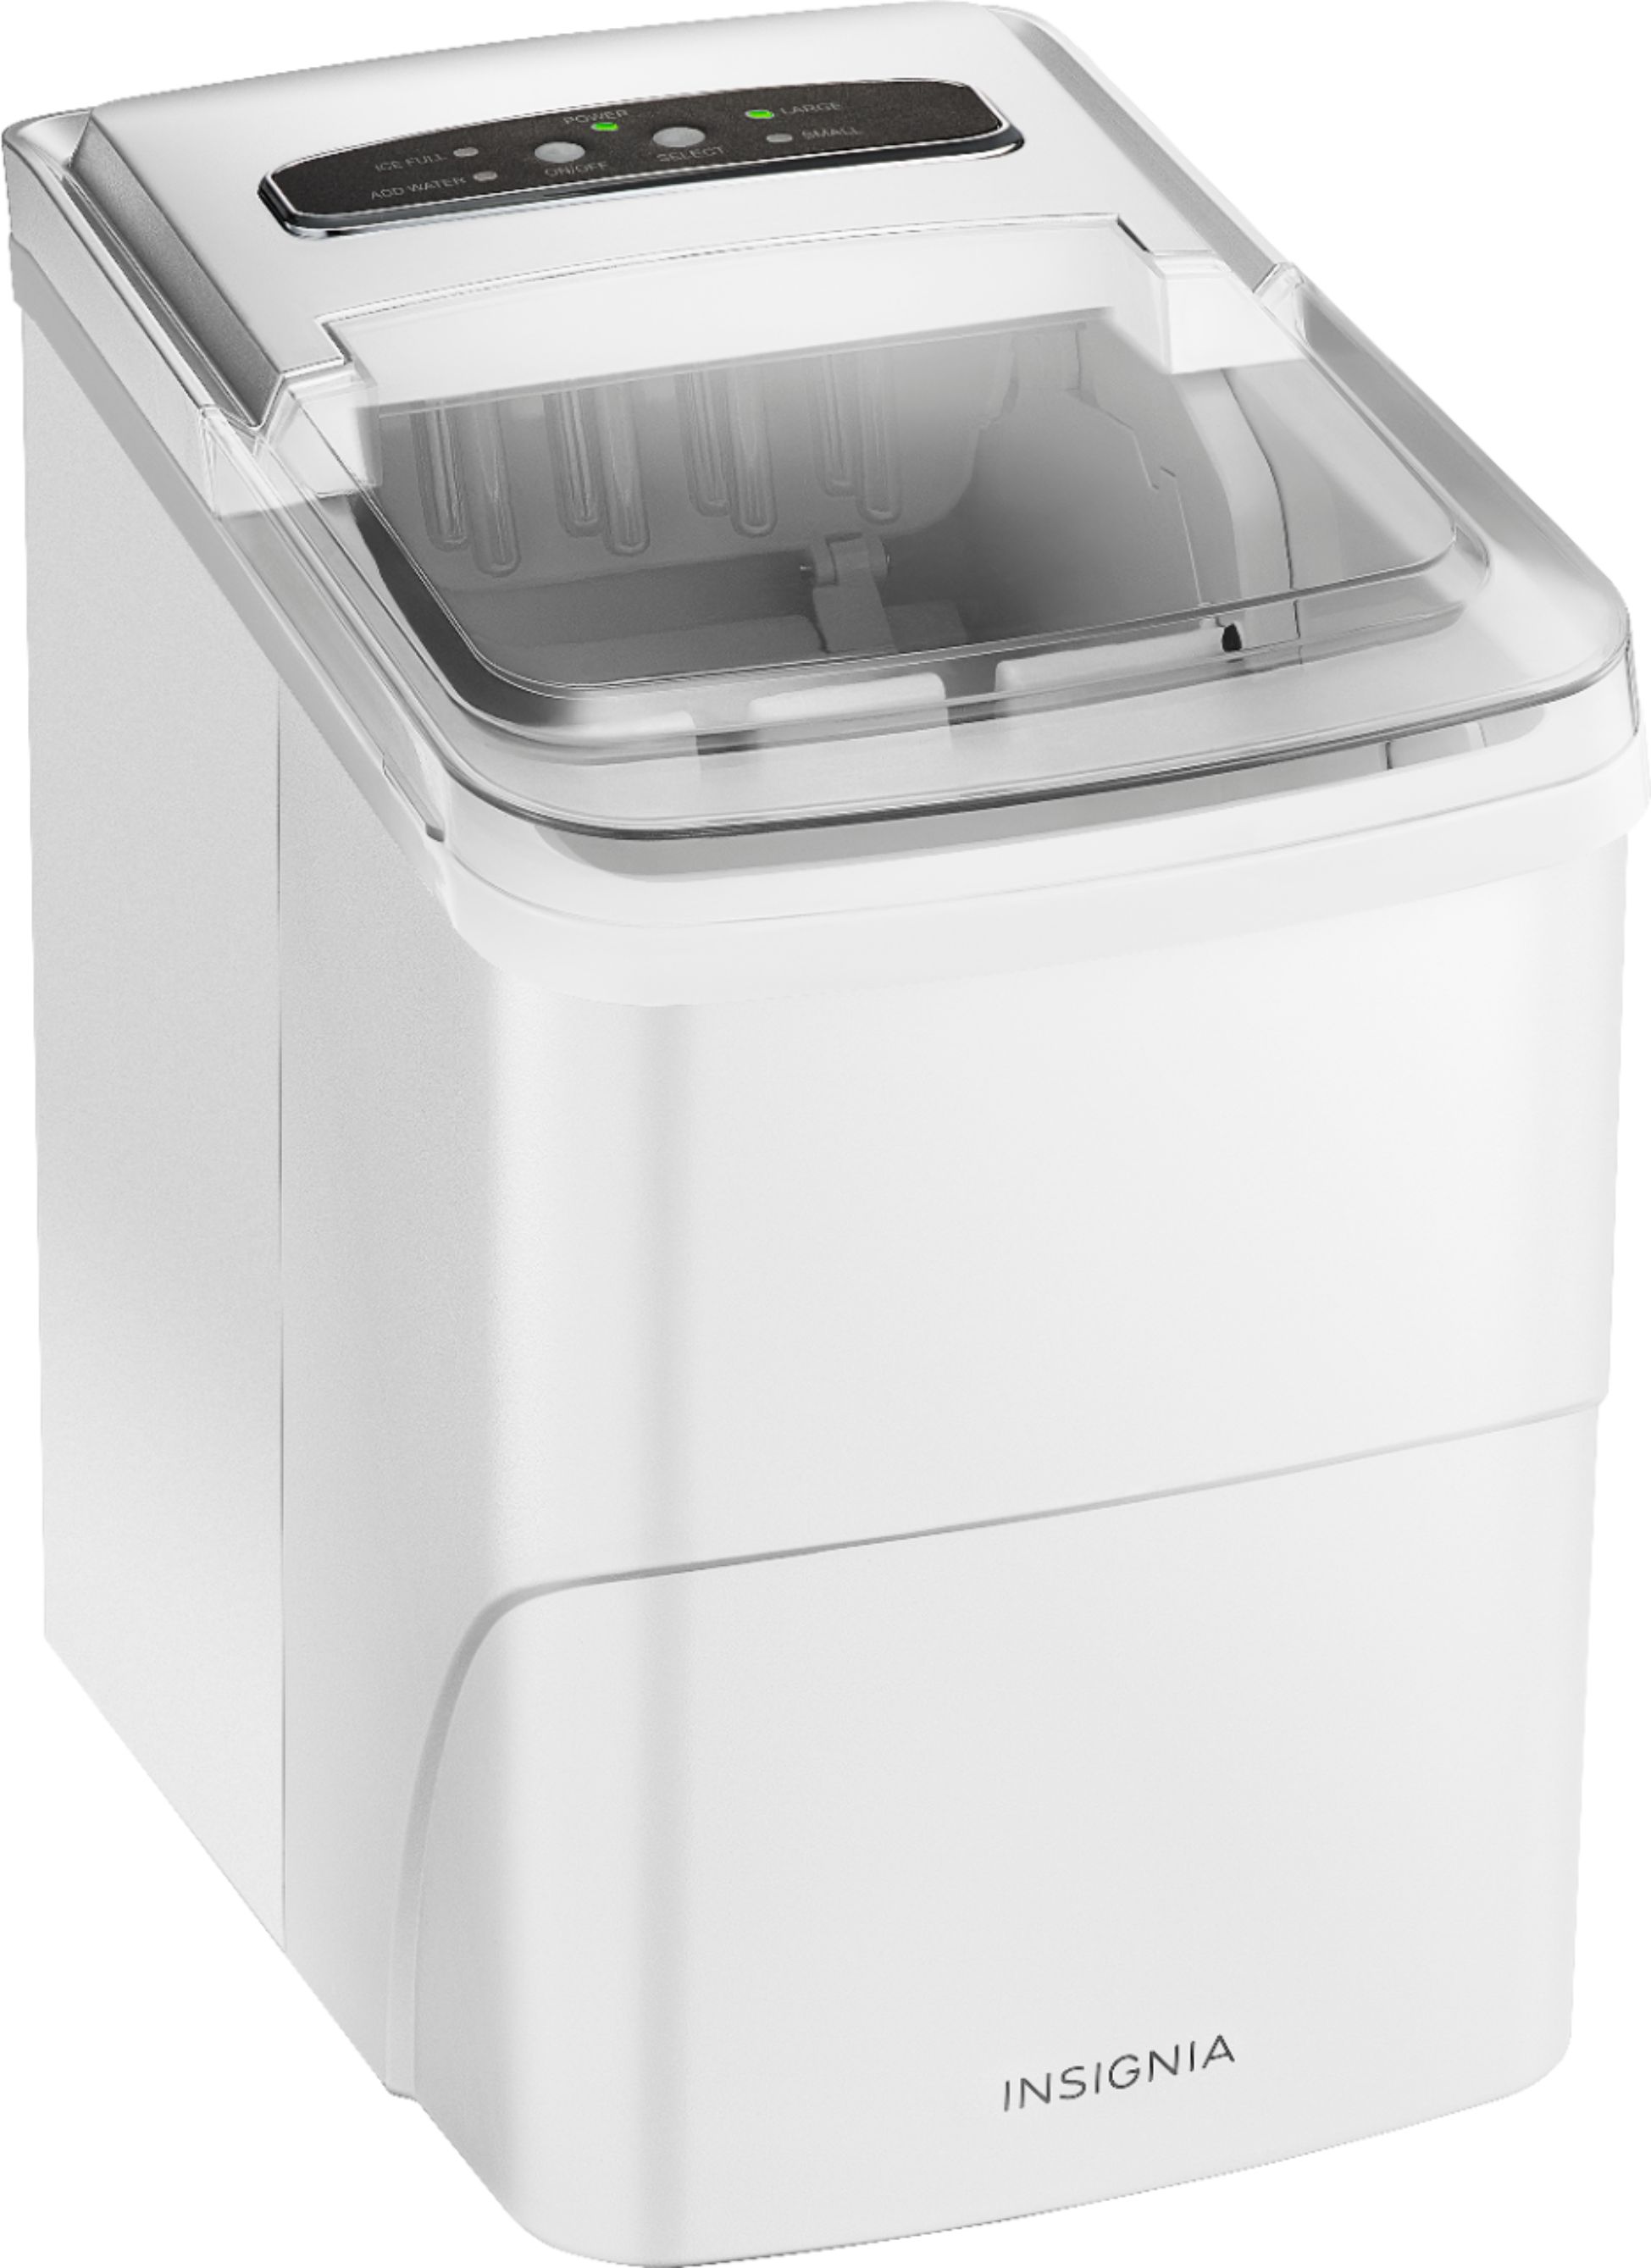 Portable Ice Maker review, Insignia brand. A Christmas gift from